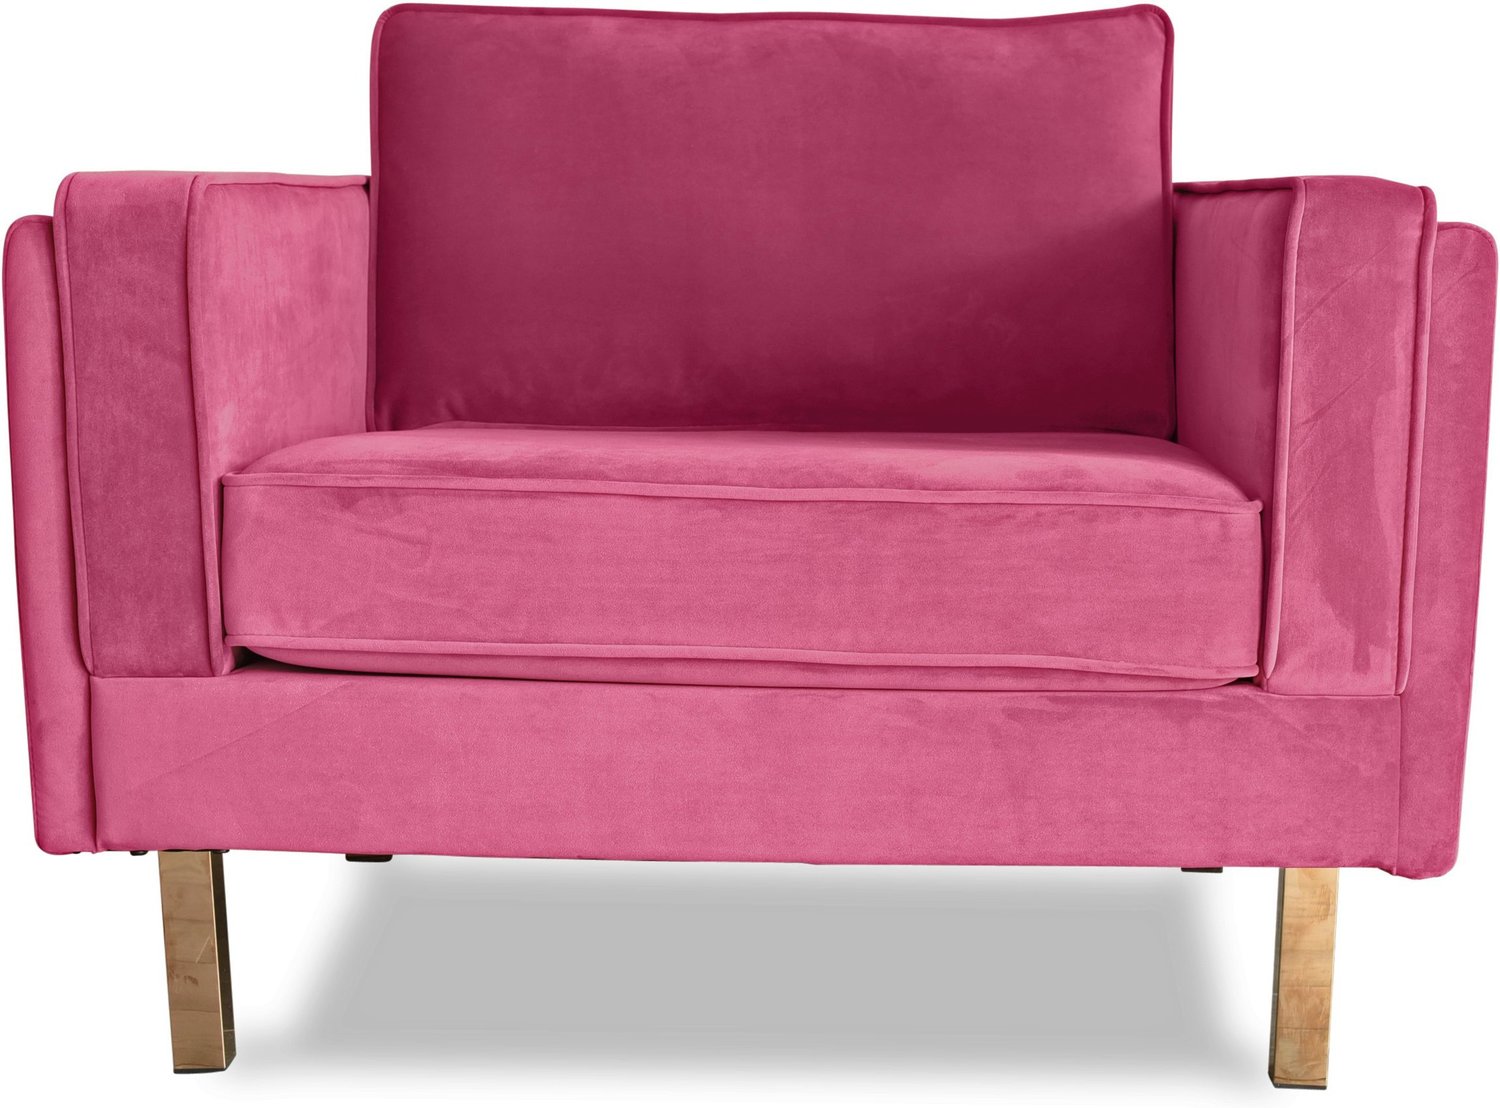  Edloe Finch Lounge Chair Chairs Fabric color: Rose pink velvet Midcentury